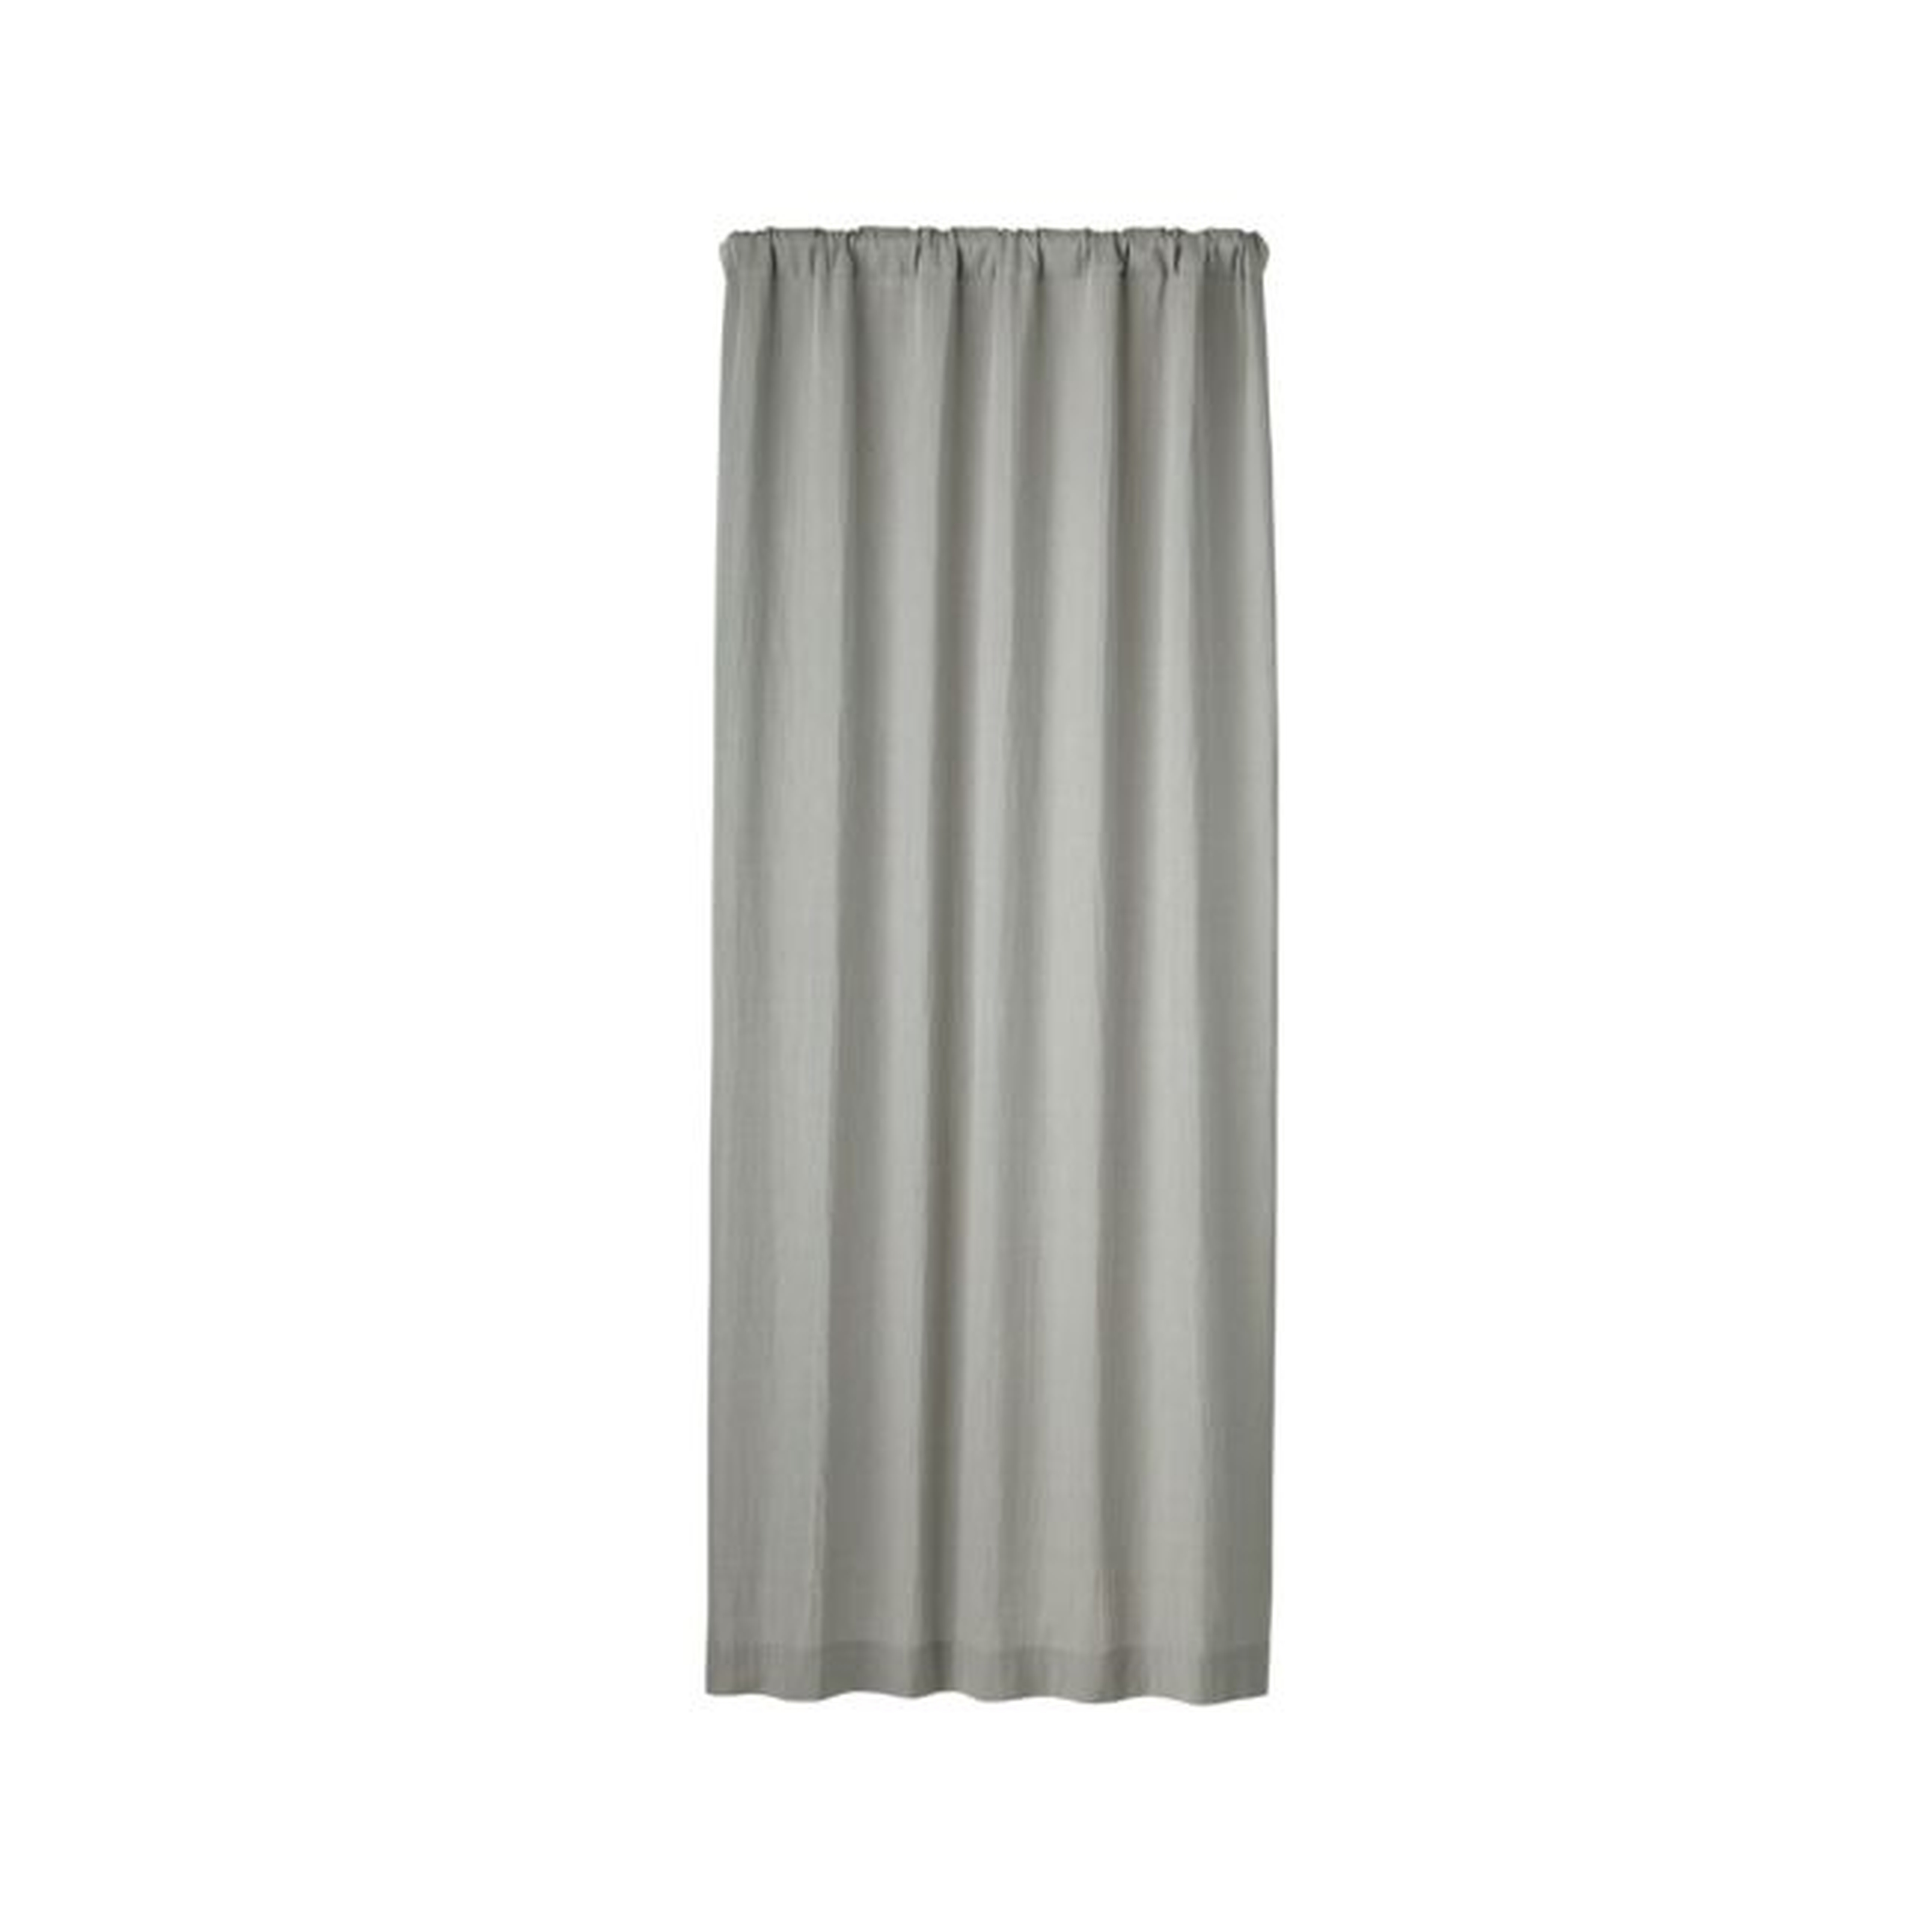 Organic Cotton Double Weave Quiet Grey Sheer Curtain Panel 50 x 108 - Crate and Barrel